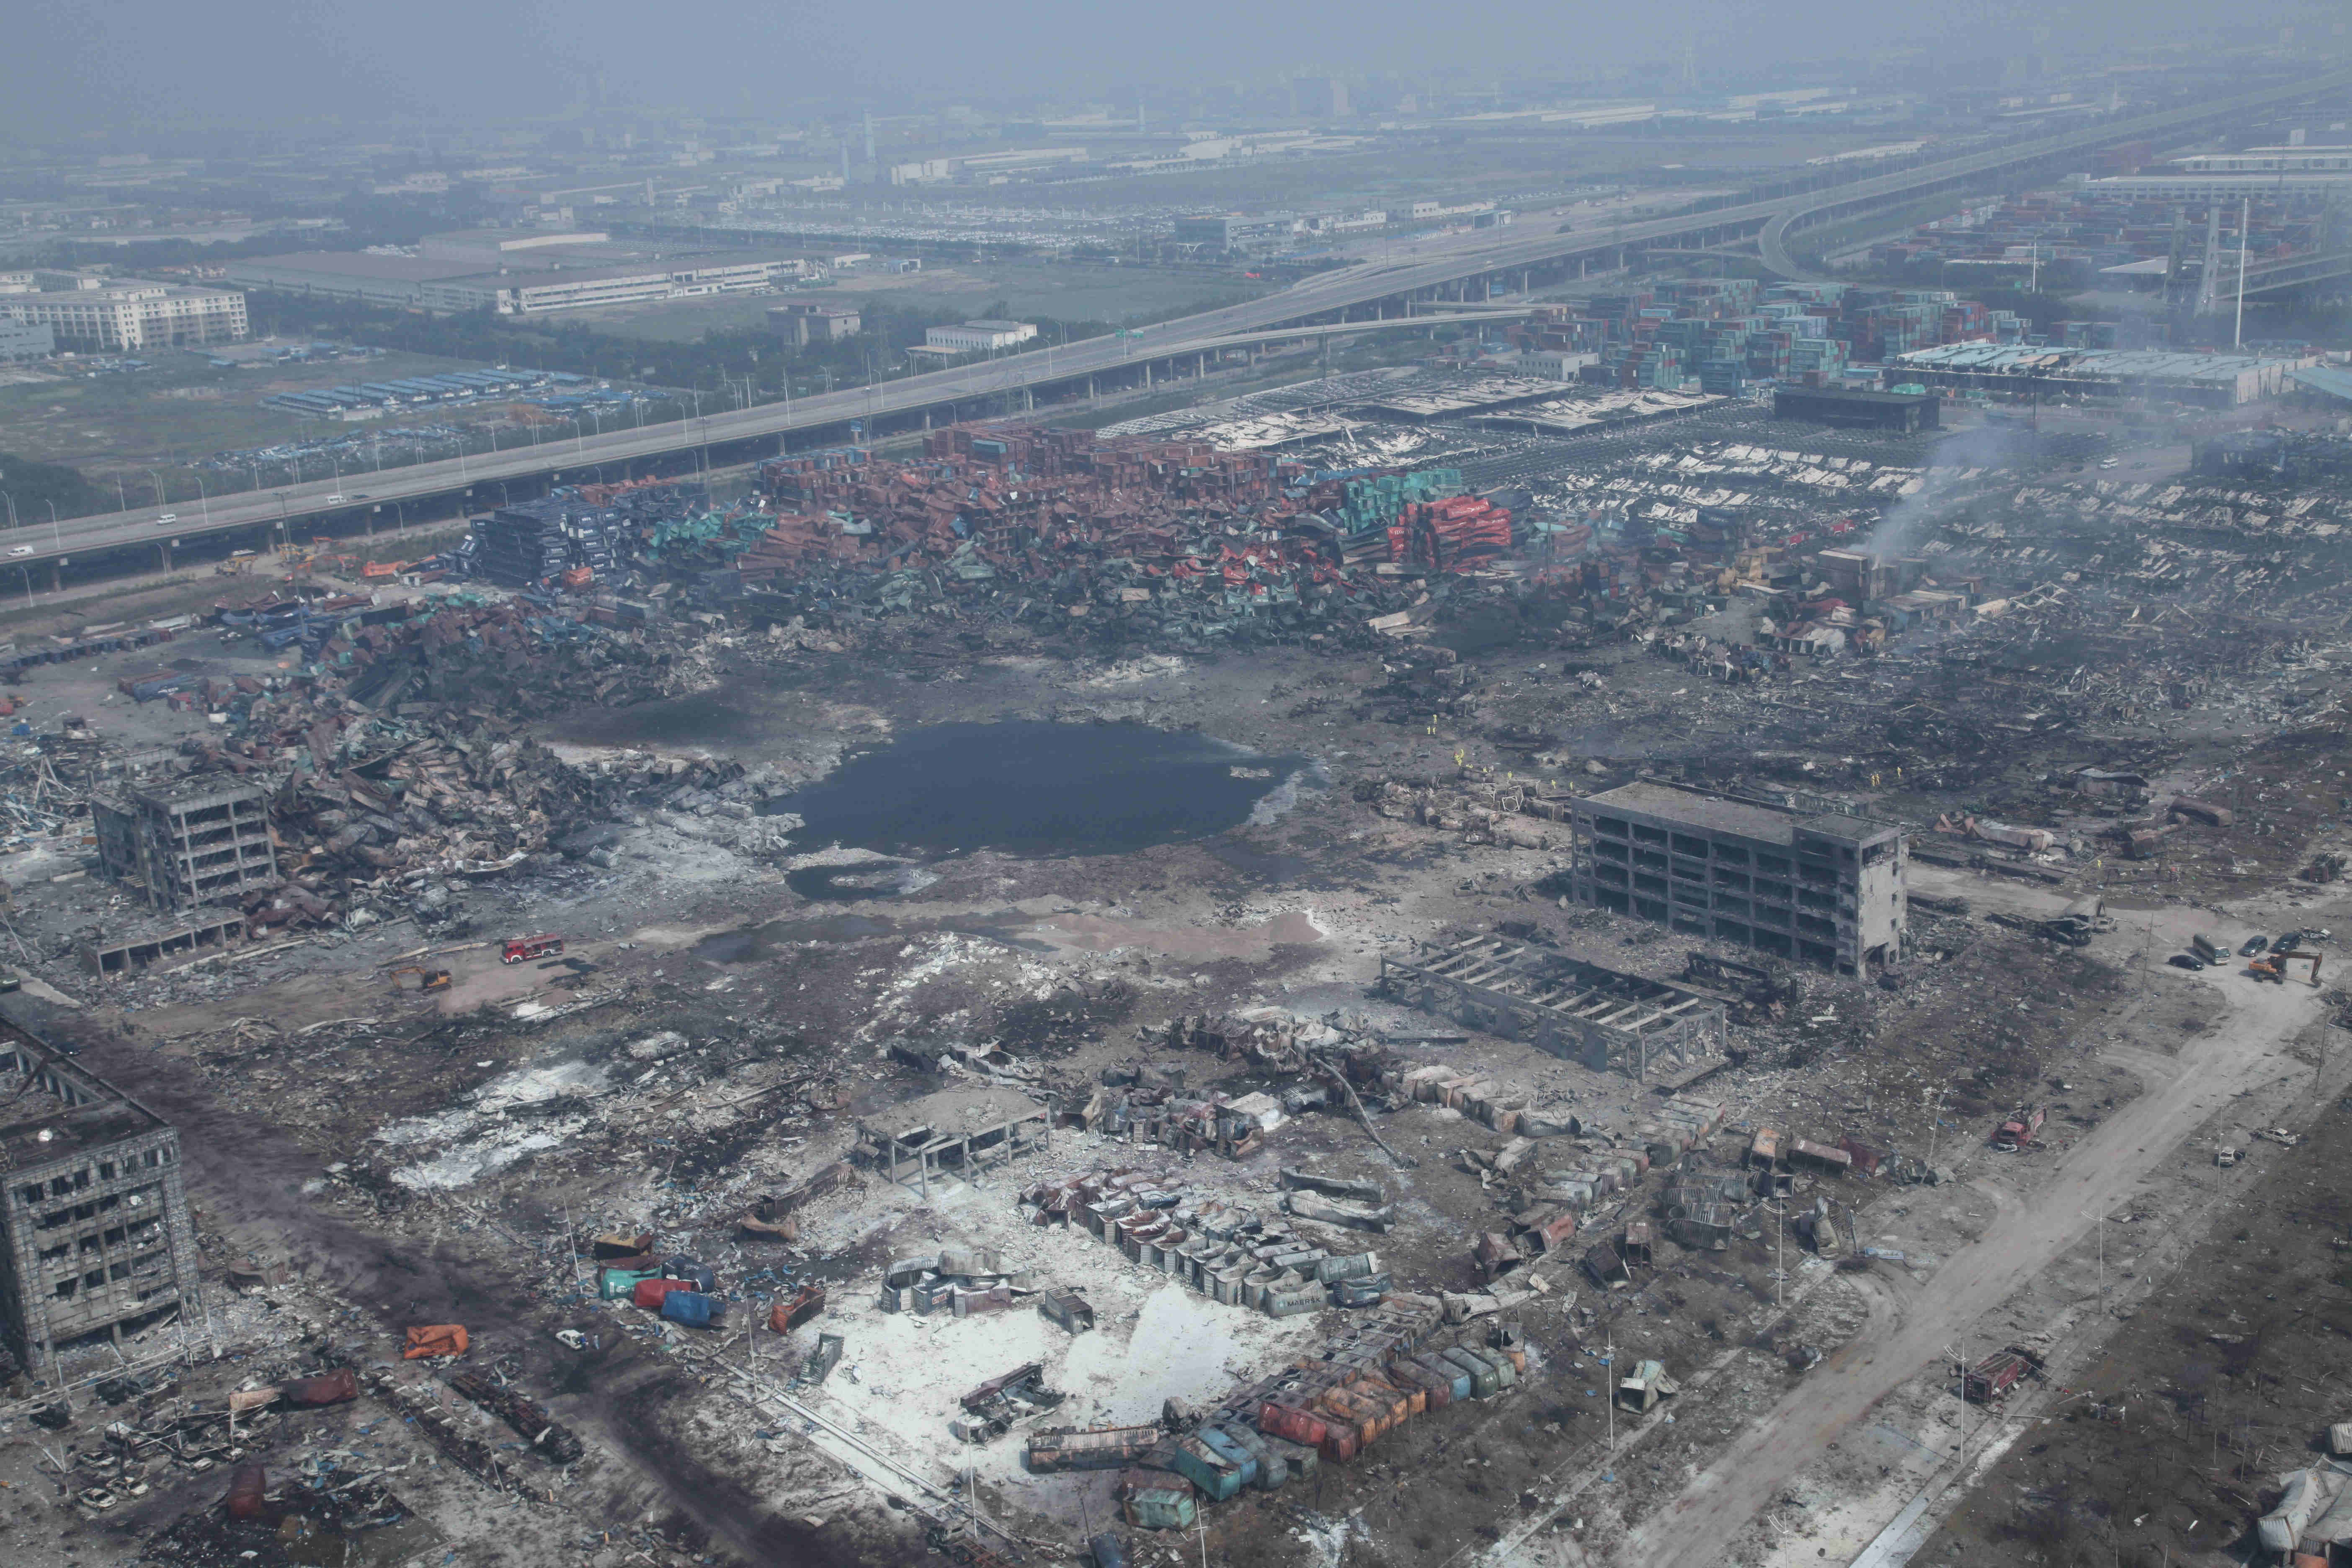 A total of 112 bodies have been found and 95 people remained missing after the explosion north China's Tianjin Municipality. Photo: Xinhua